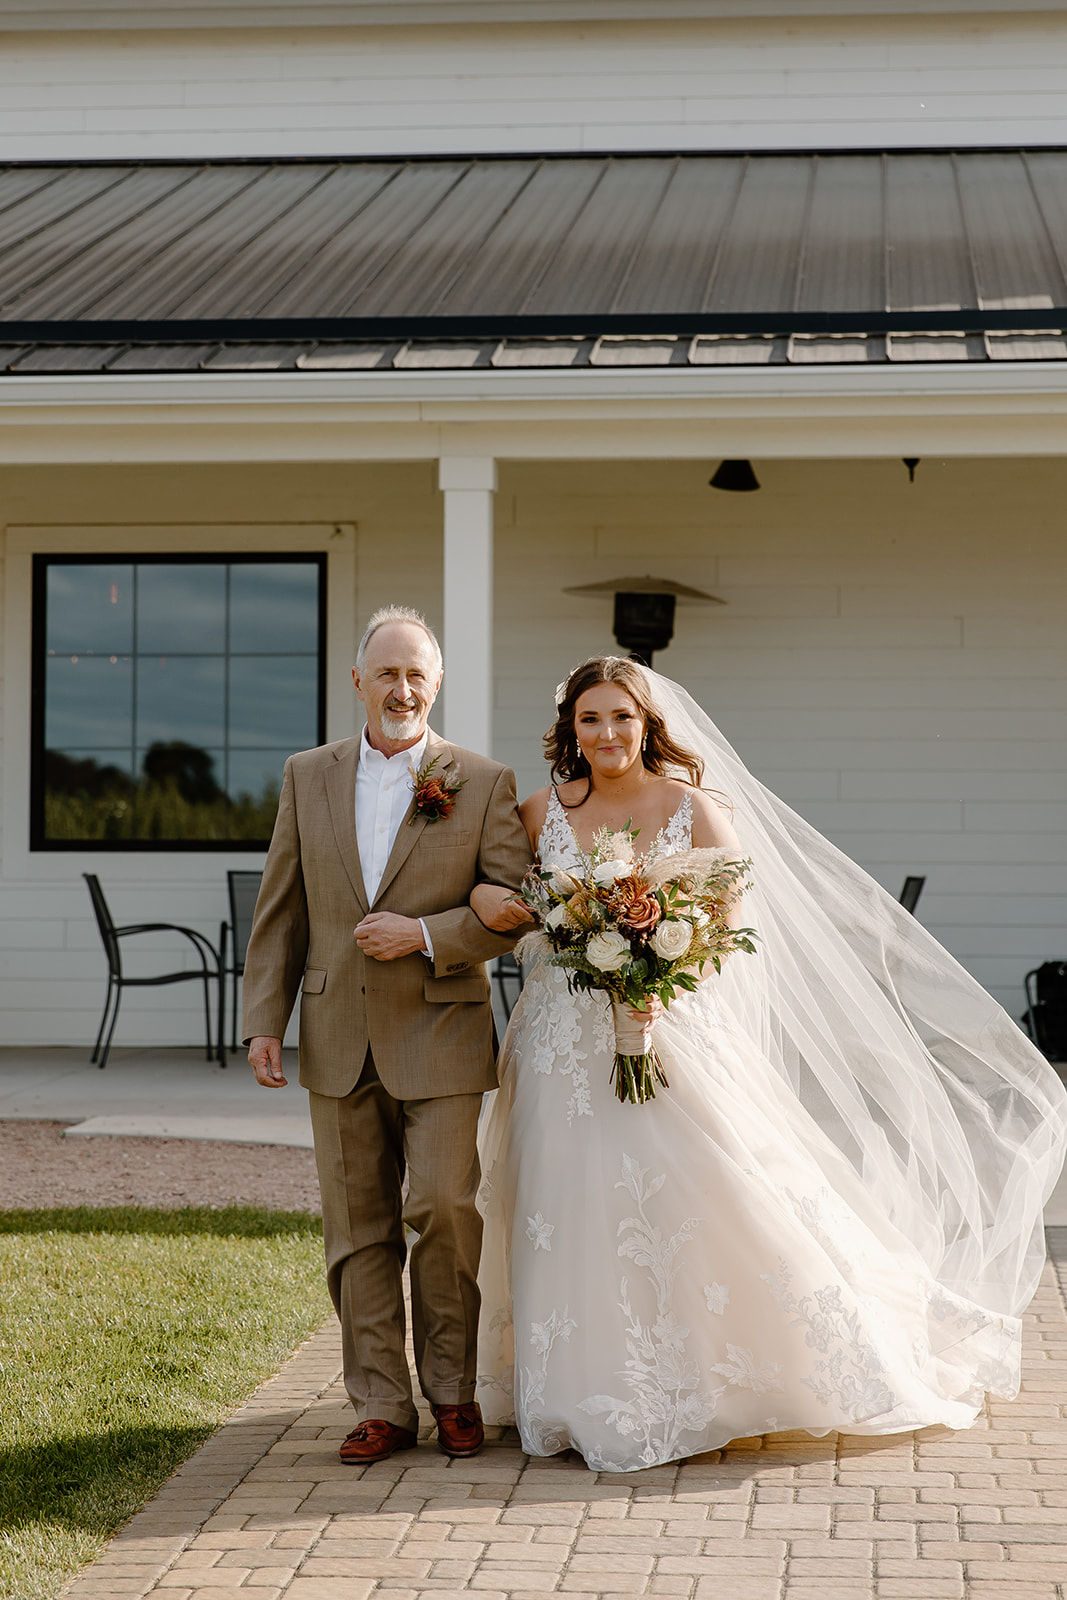 Bride and her father walk down the aisle